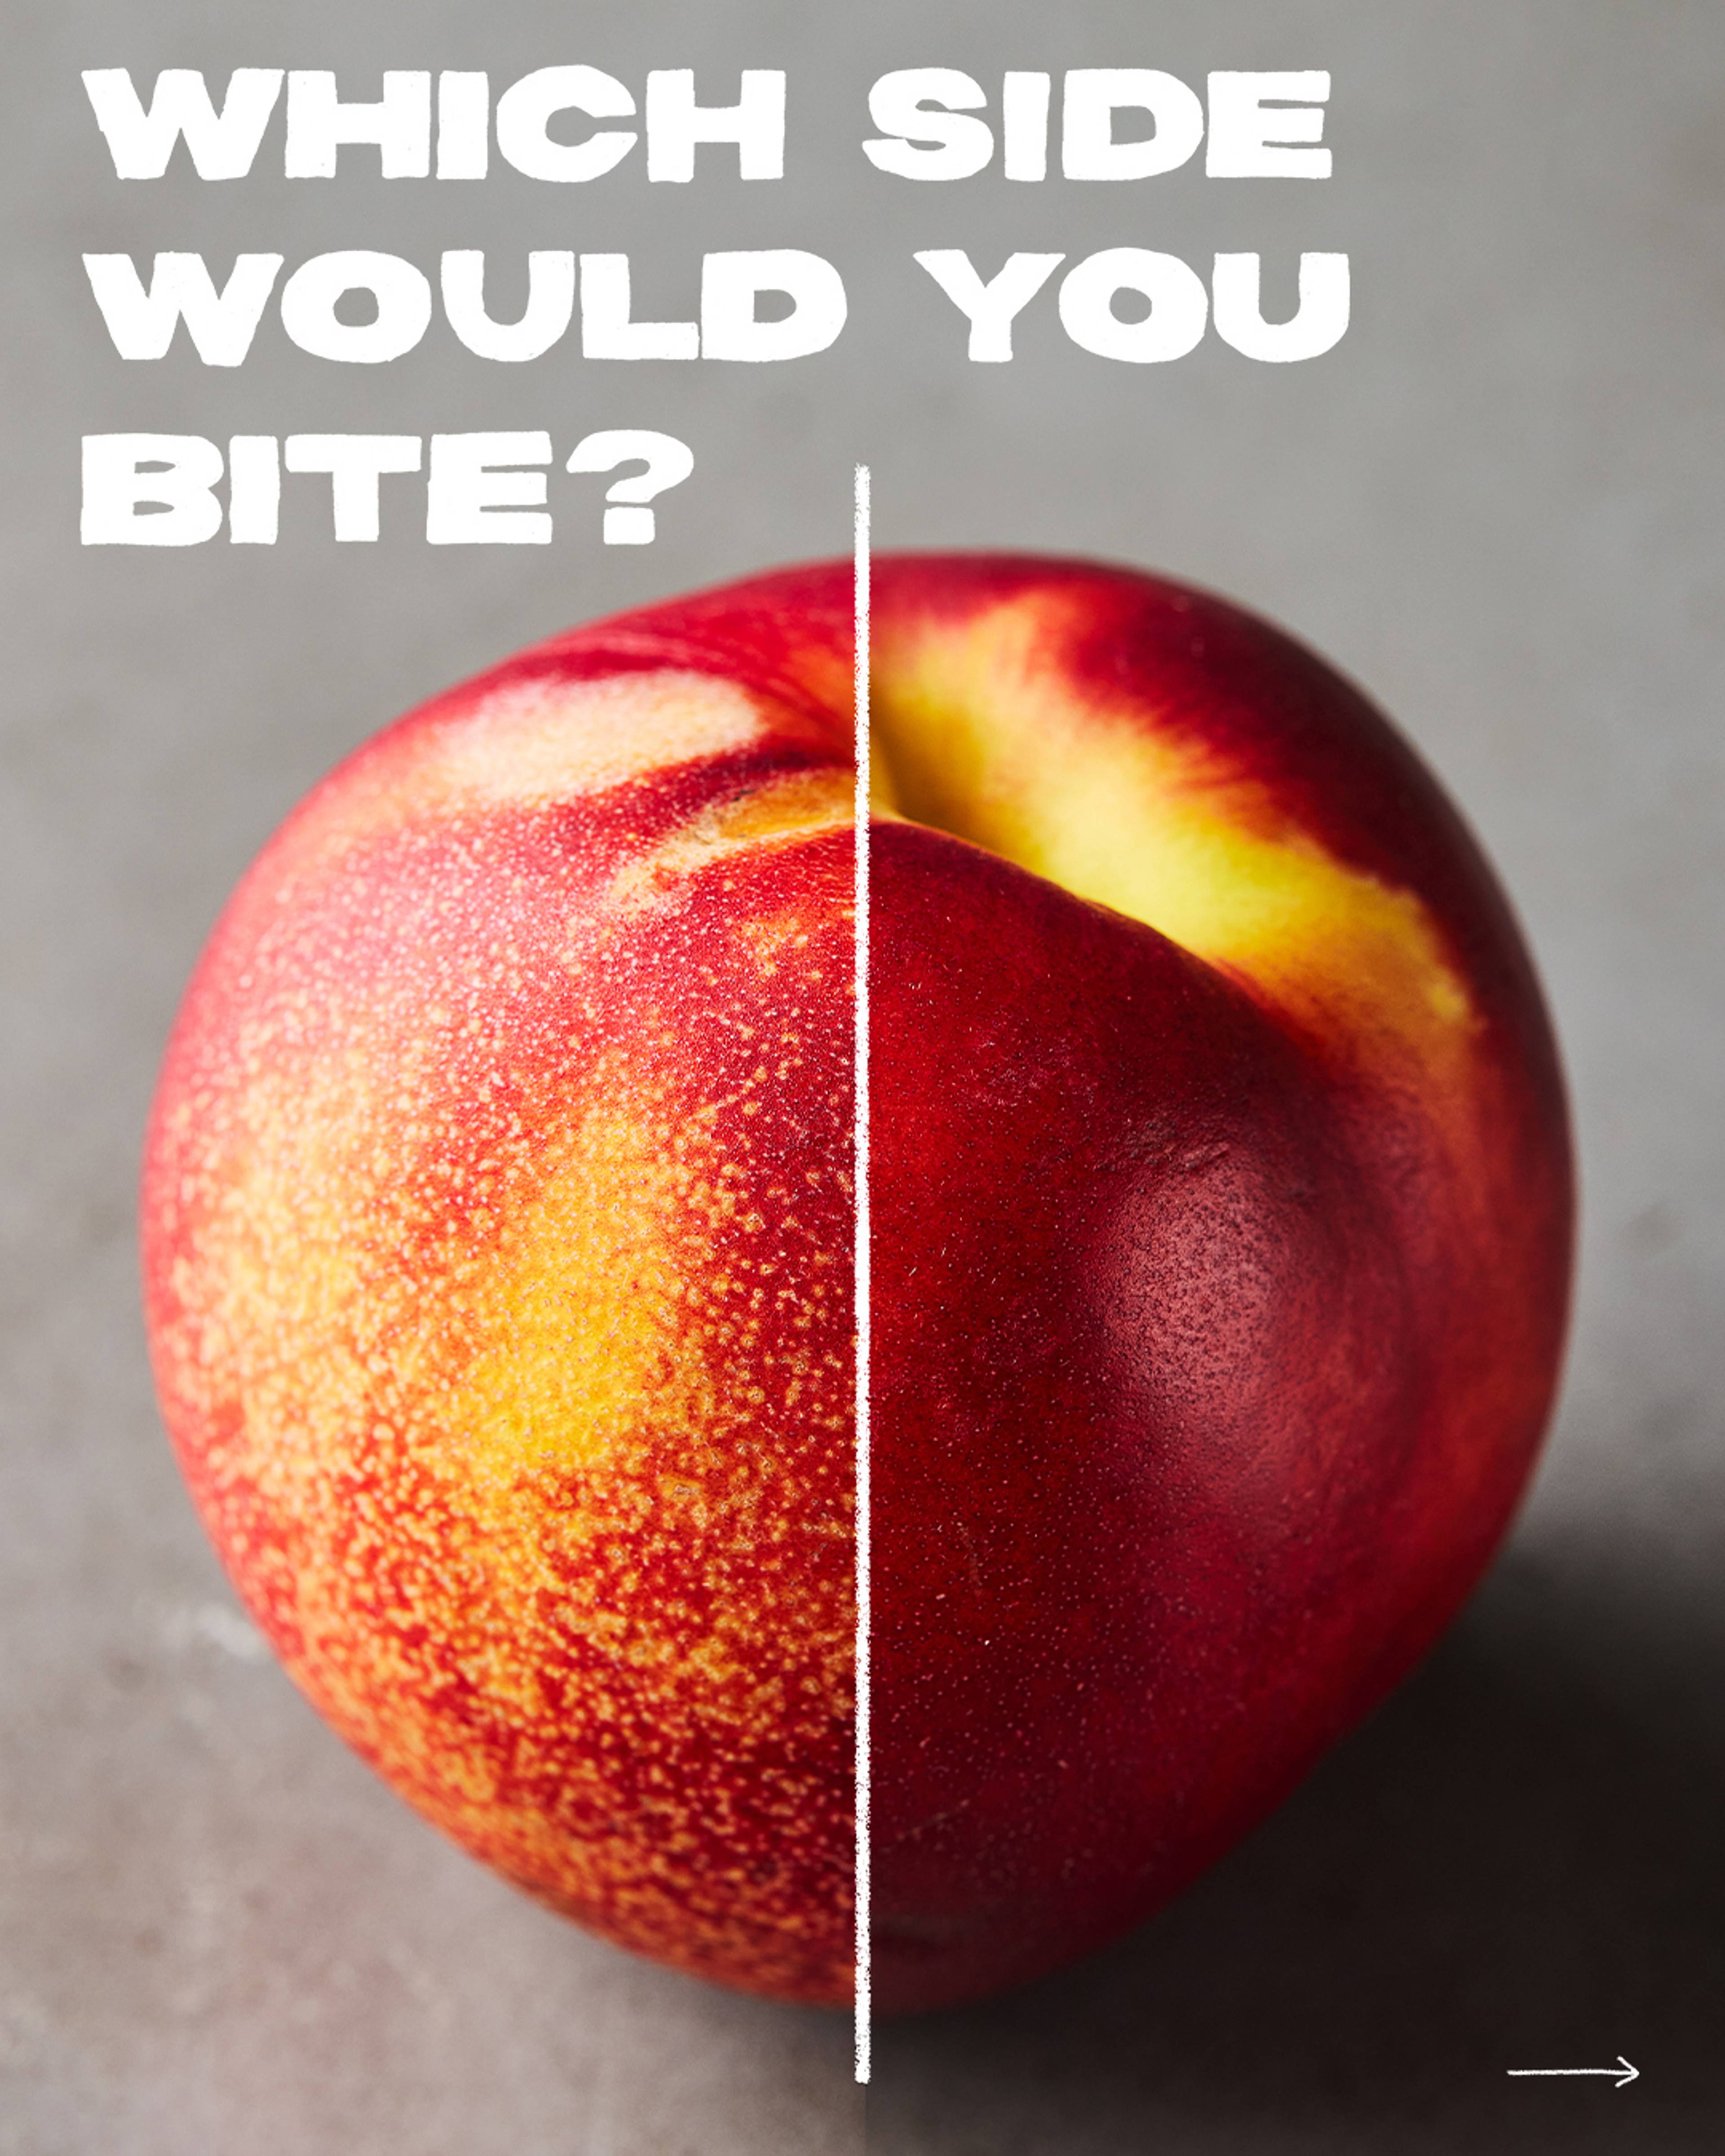 nectarine split in half one speckled side one not with copy overlay 'which side would you bite'